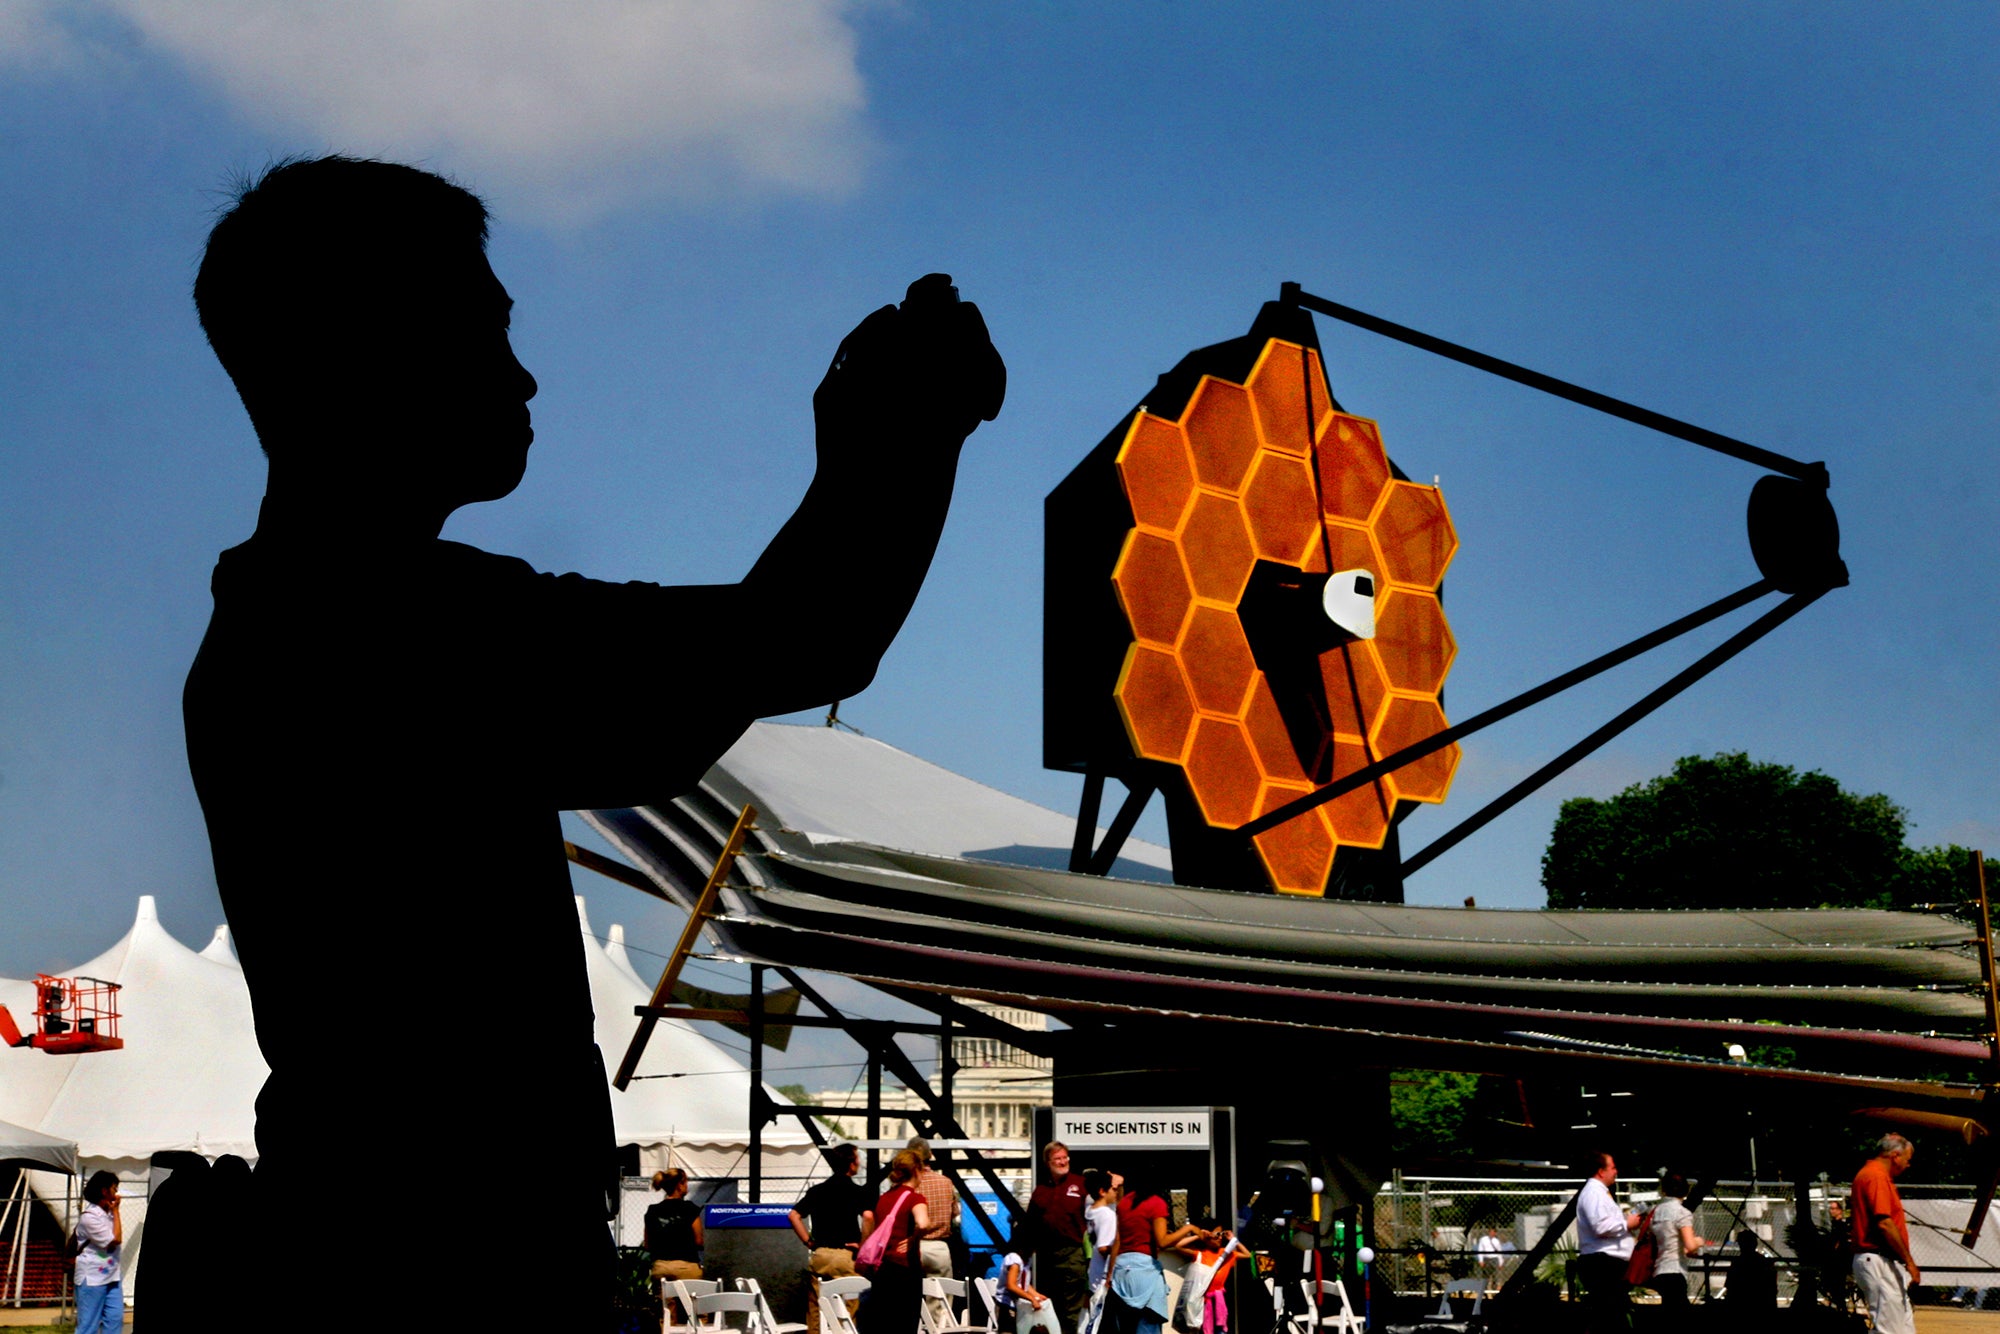 Silhouette of a visitor taking a photo, a full-size model of the James Webb Space Telescope is visible in the background on display outside of the National Air and Space Museum in Washington, D.C.